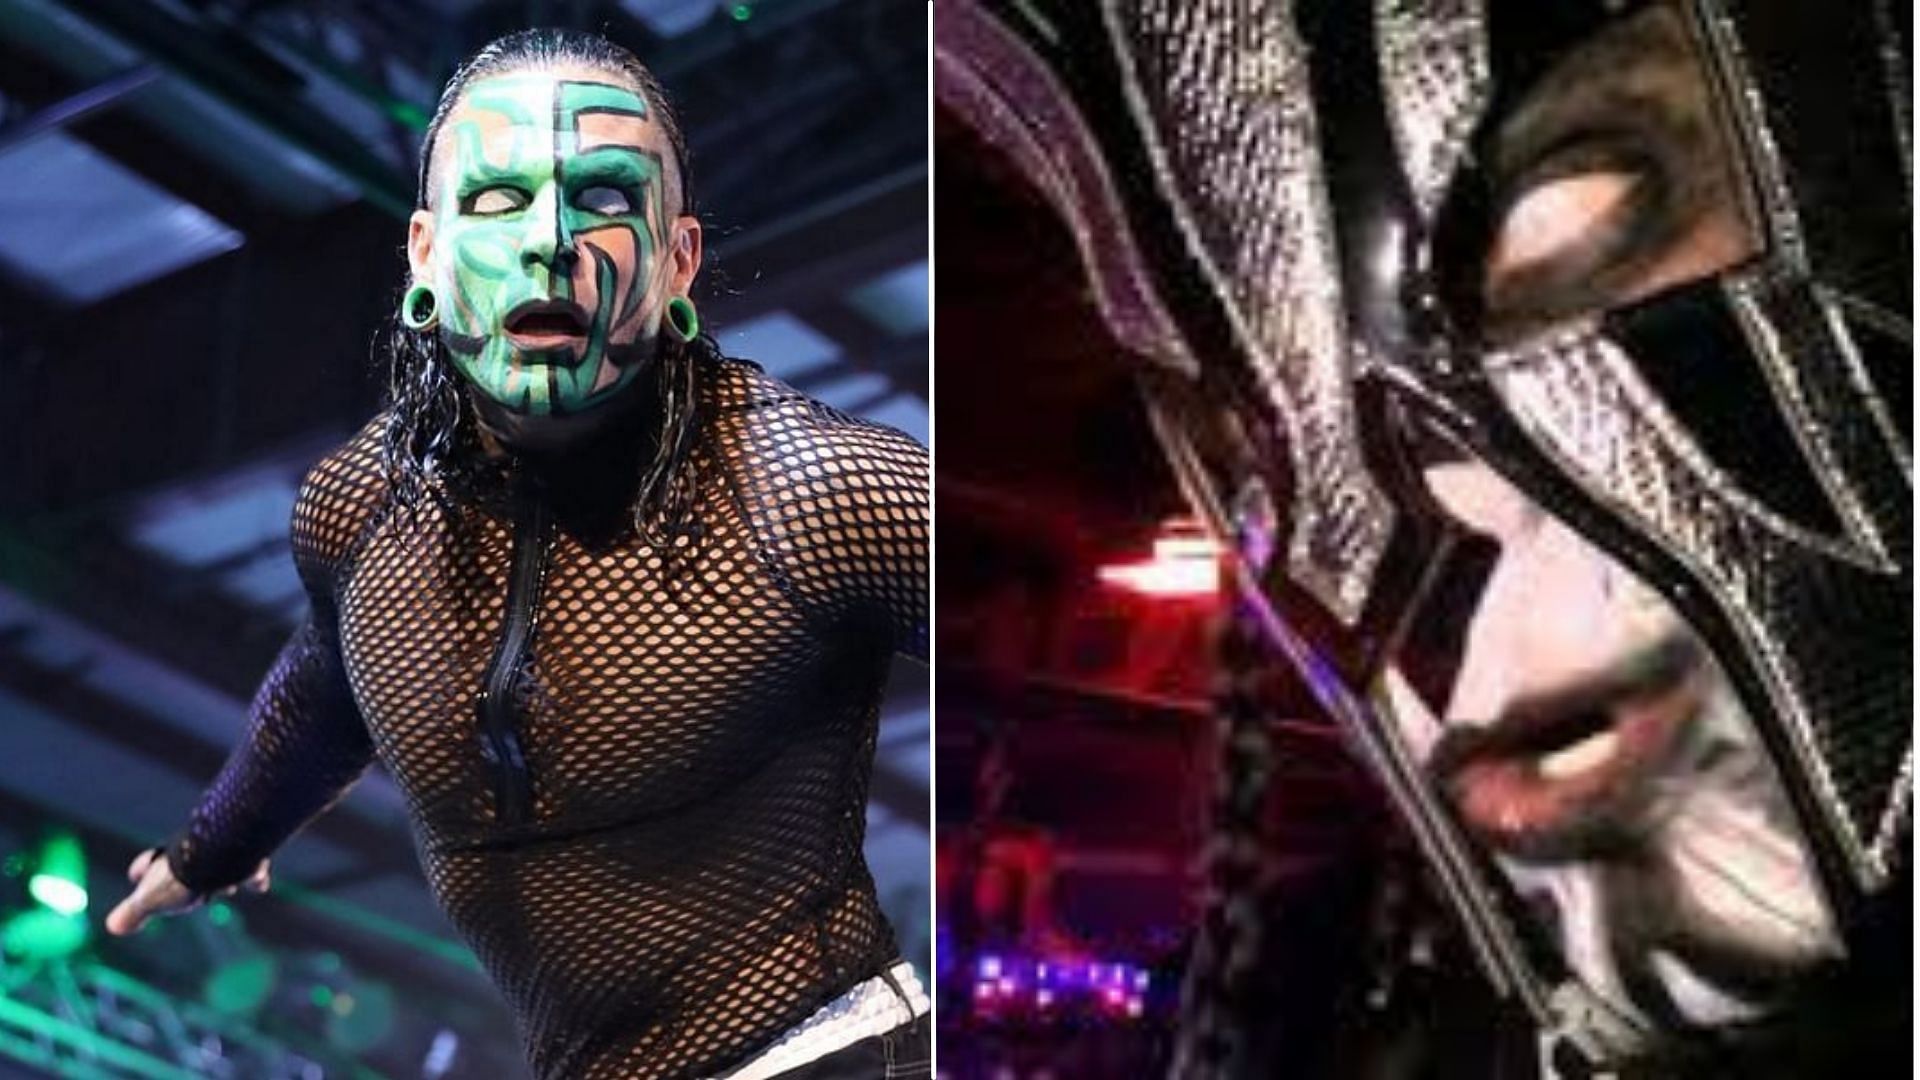 The Charismatic Enigma has donned the face paint in a manner of different ways